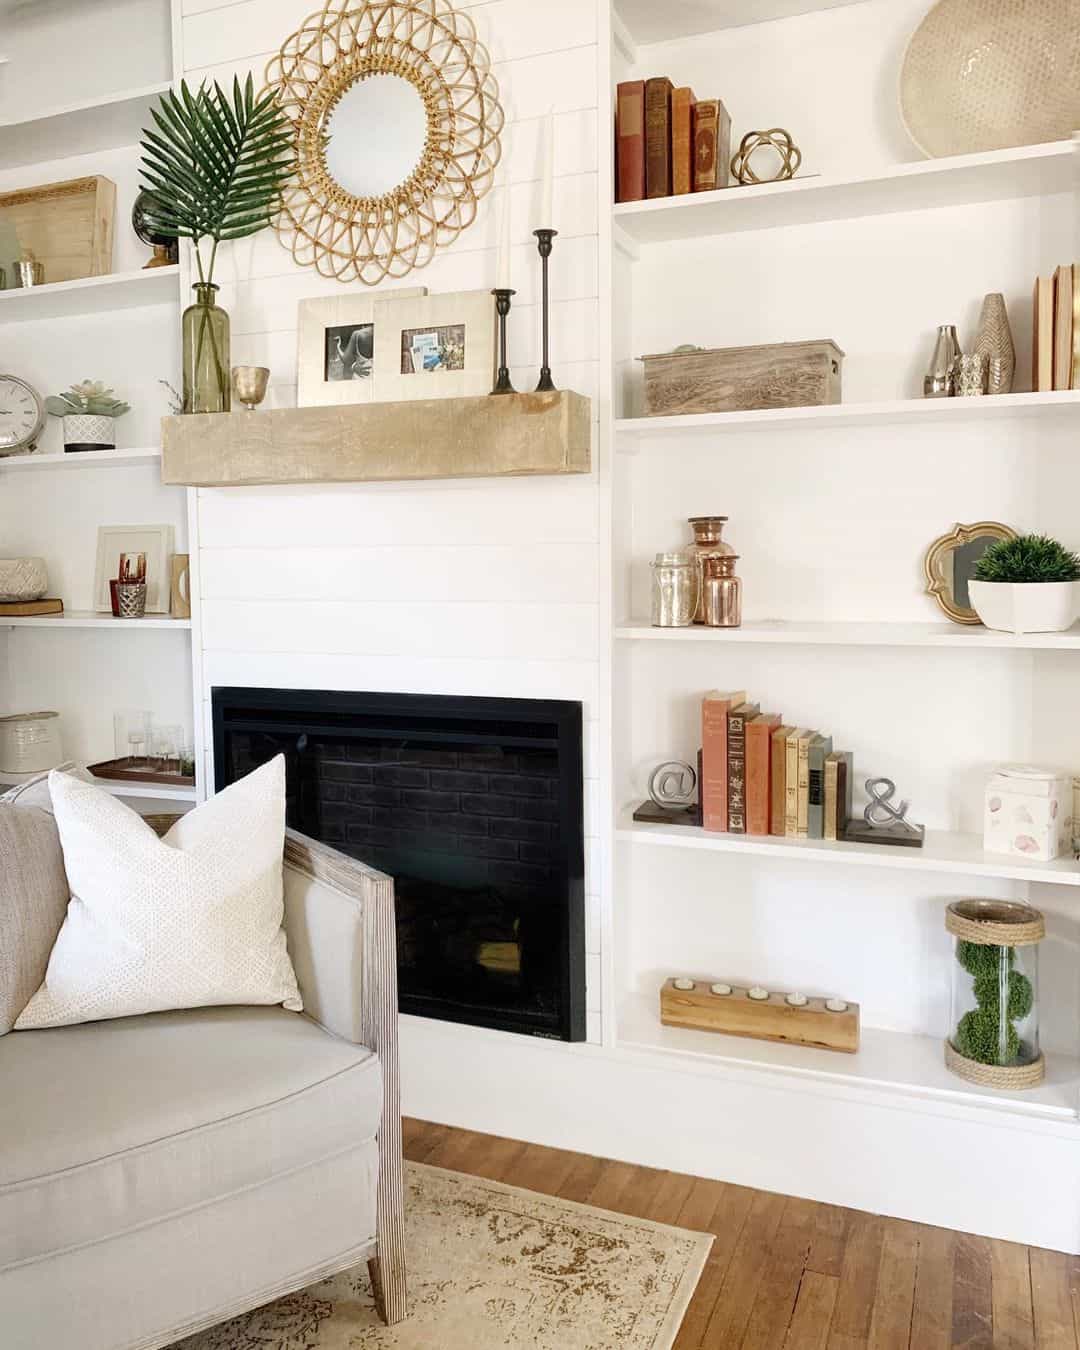 27 Bookshelf Organization Ideas with Appearance in Mind